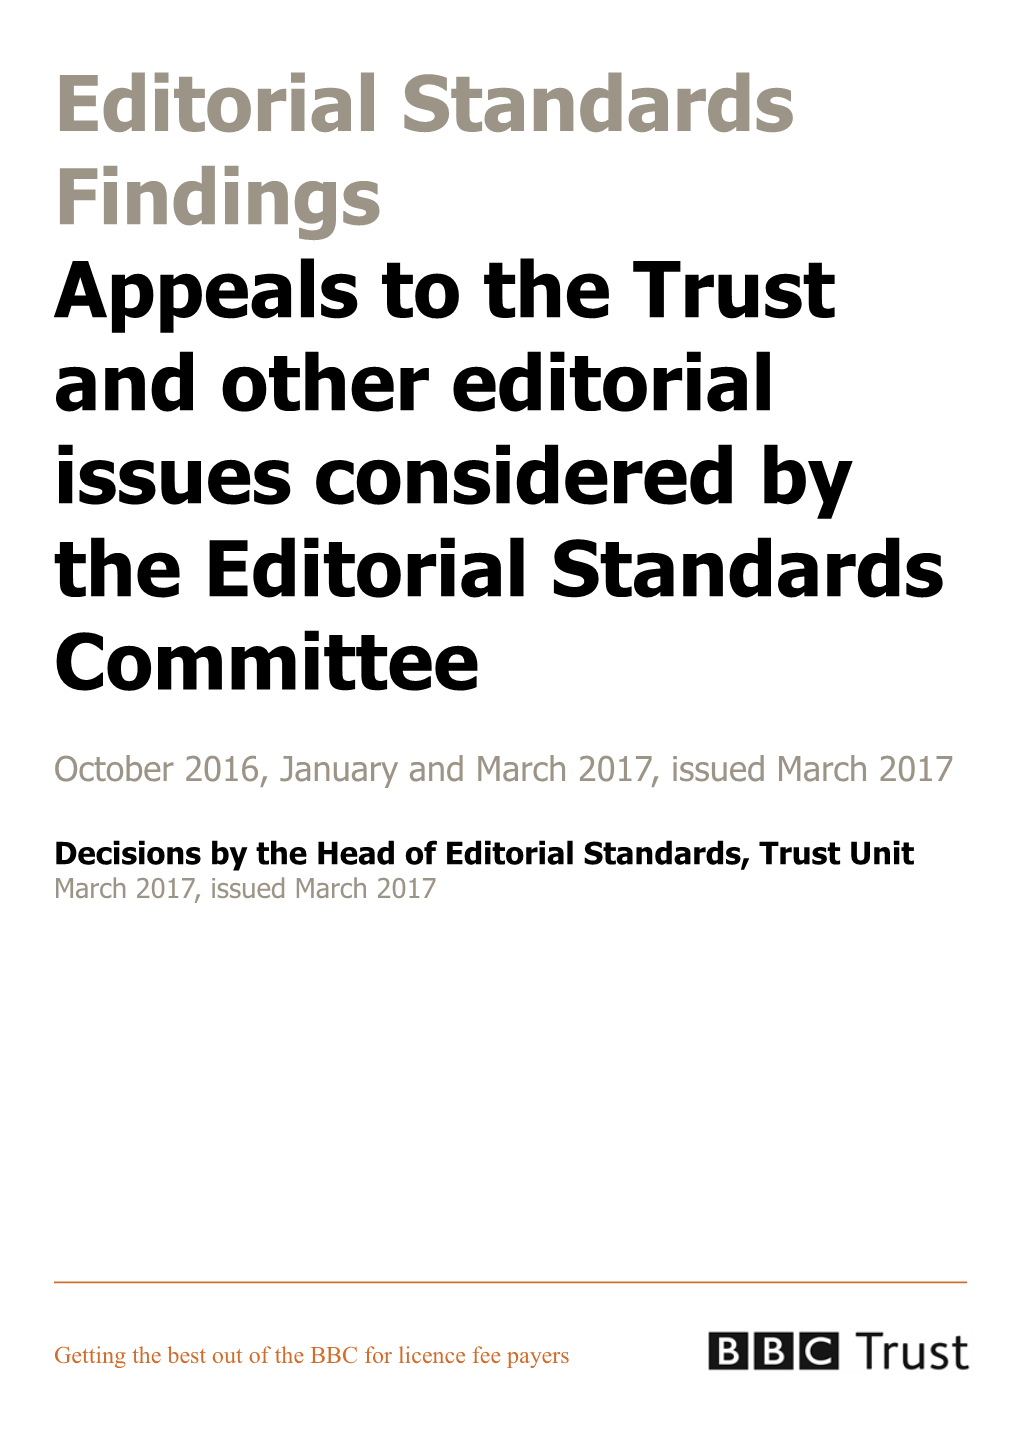 Editorial Standards Committee Bulletin, Issued March 2017